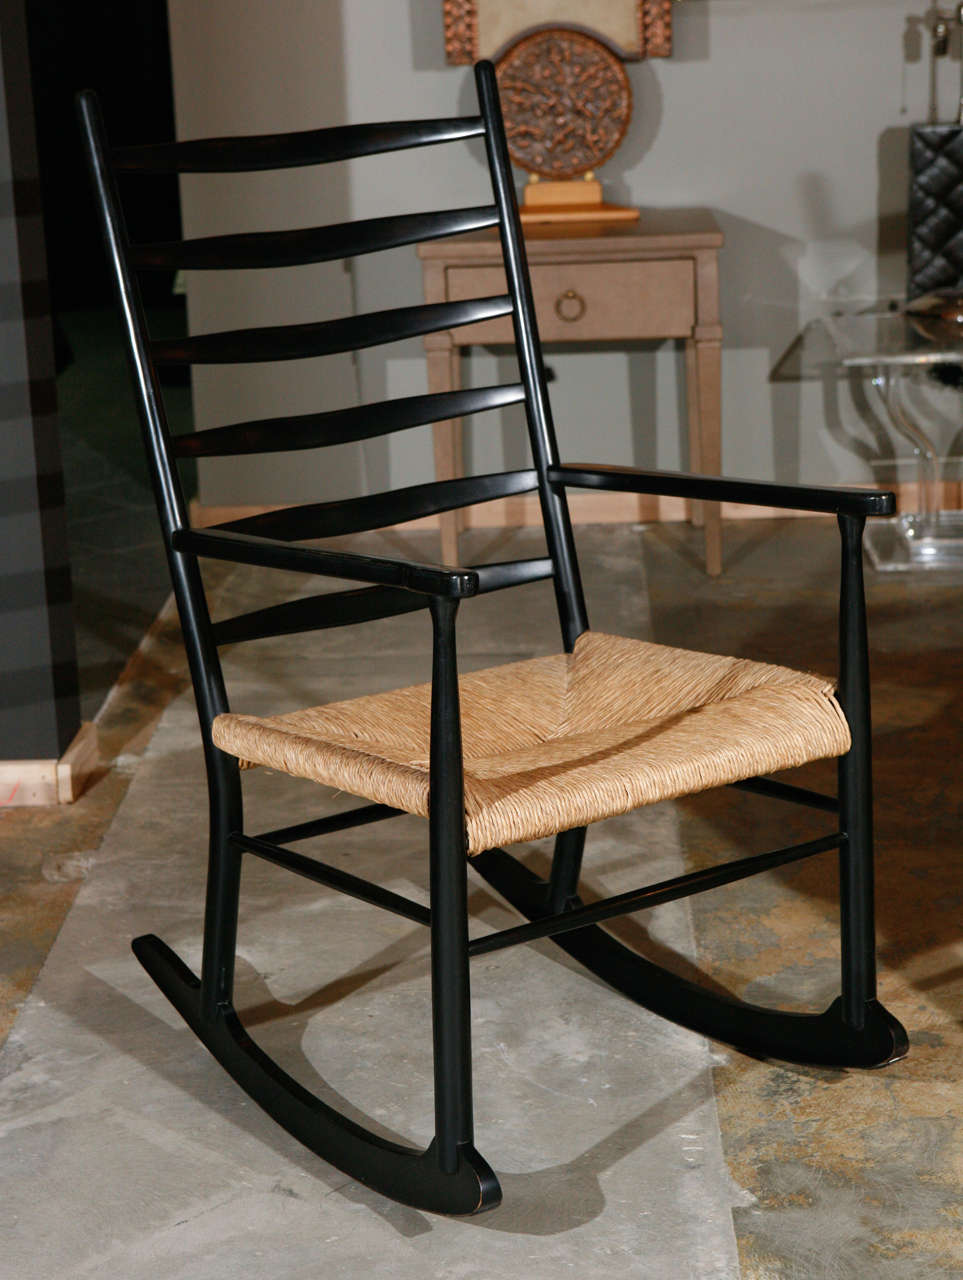 Rocking chair in manner of Gio Ponti, rush seat and black laquer finish.